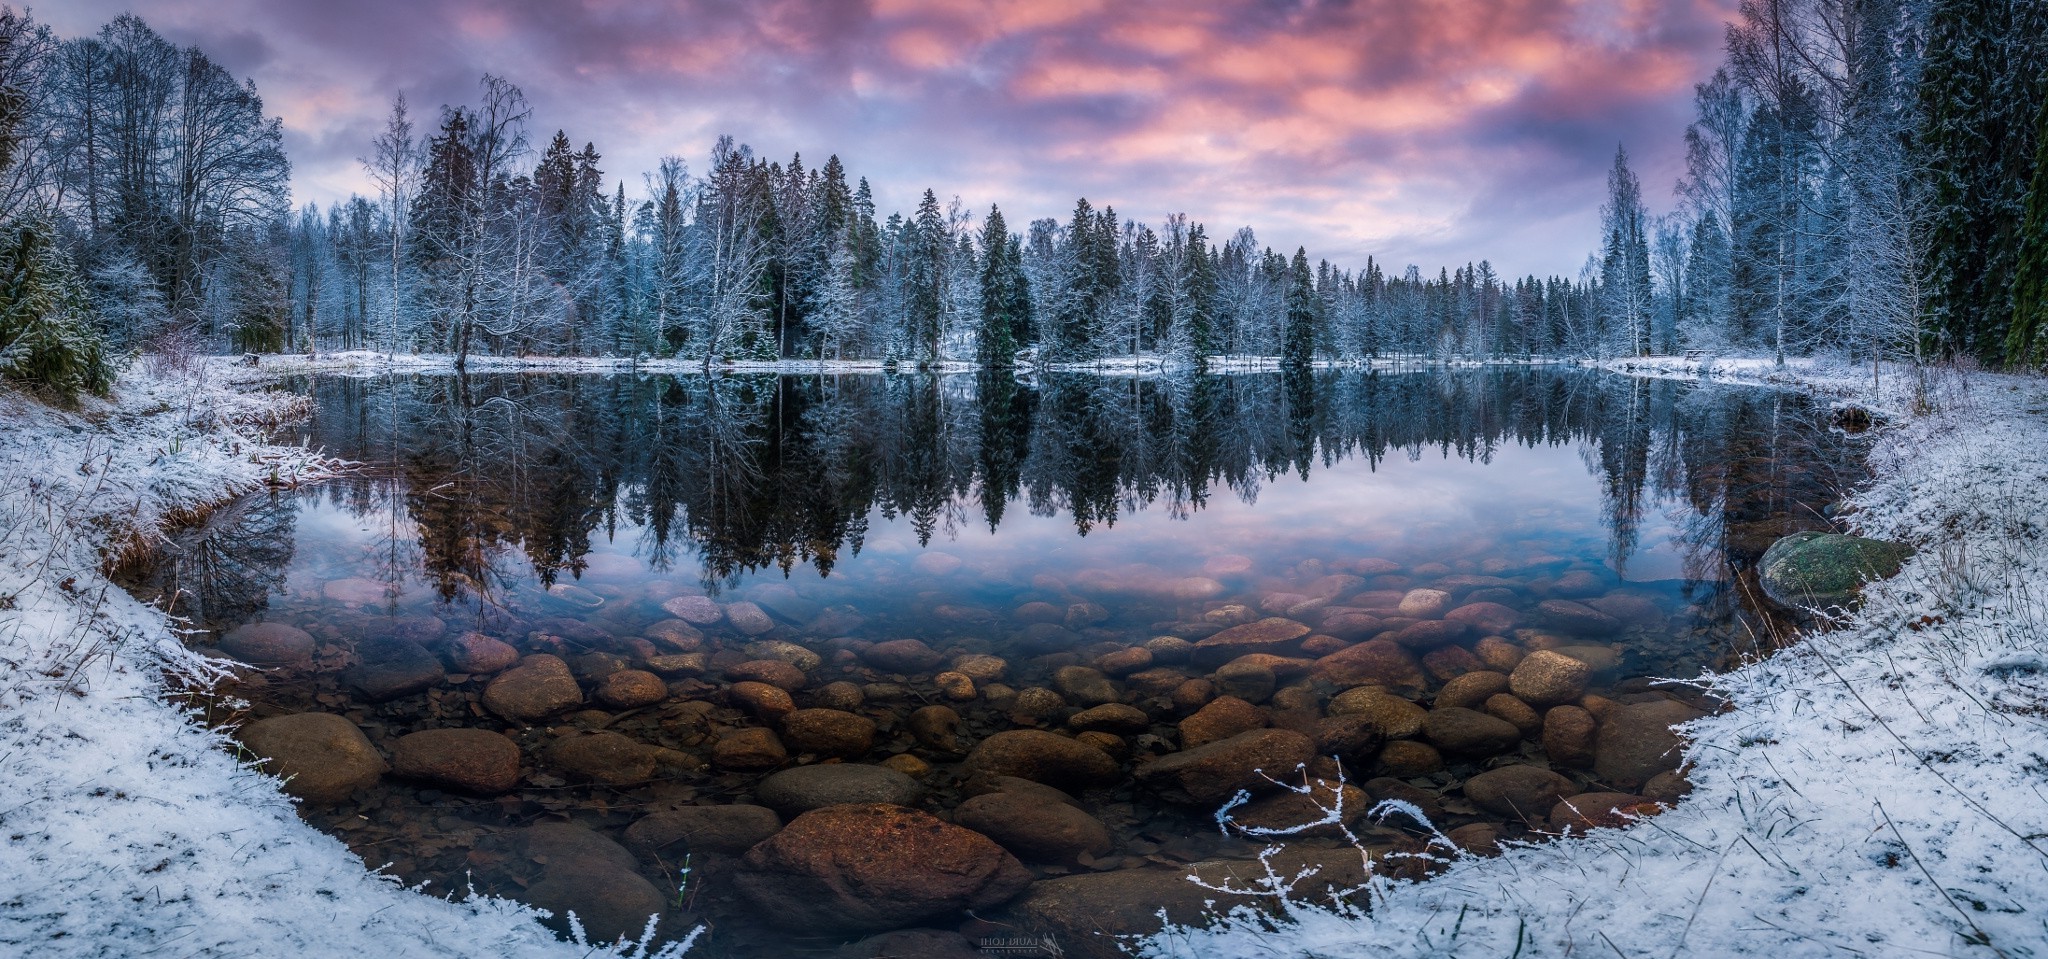 finland wallpaper,reflection,natural landscape,nature,body of water,wilderness